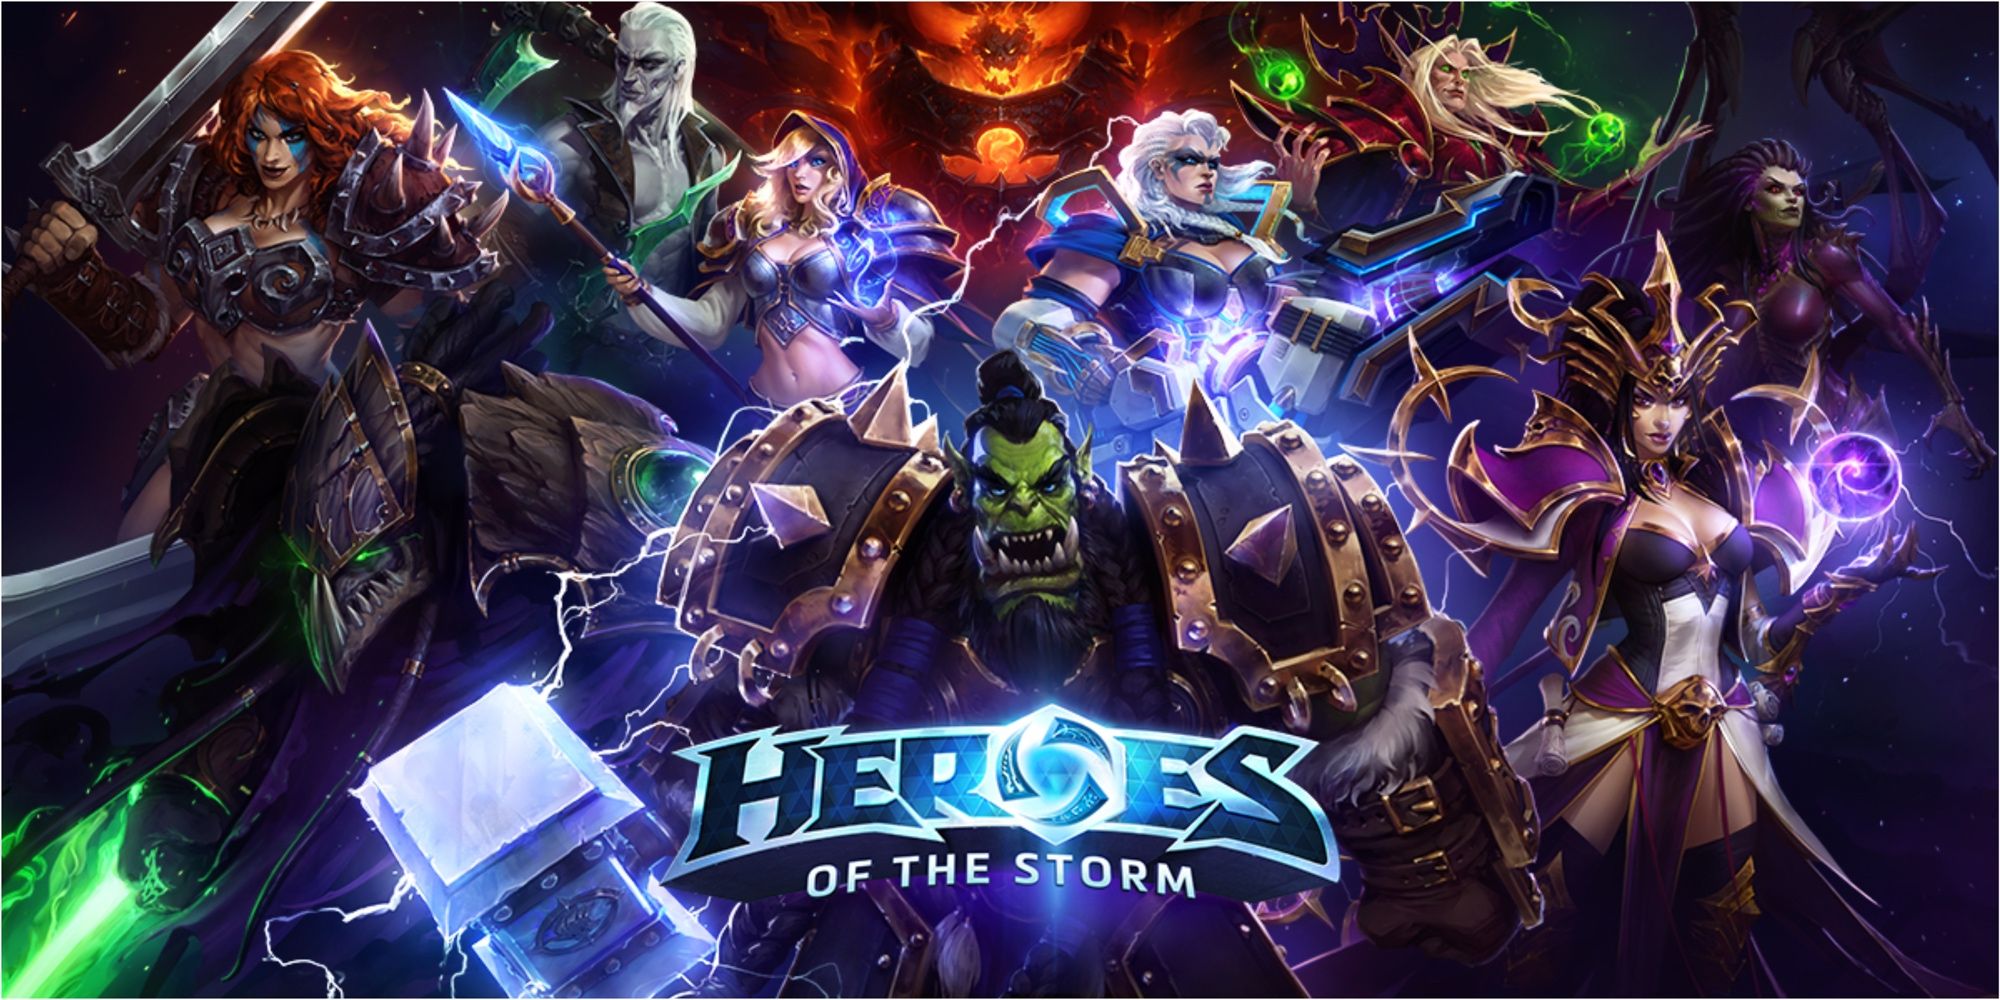 Heroes of the Storm official poster image with all main characters and a logo.